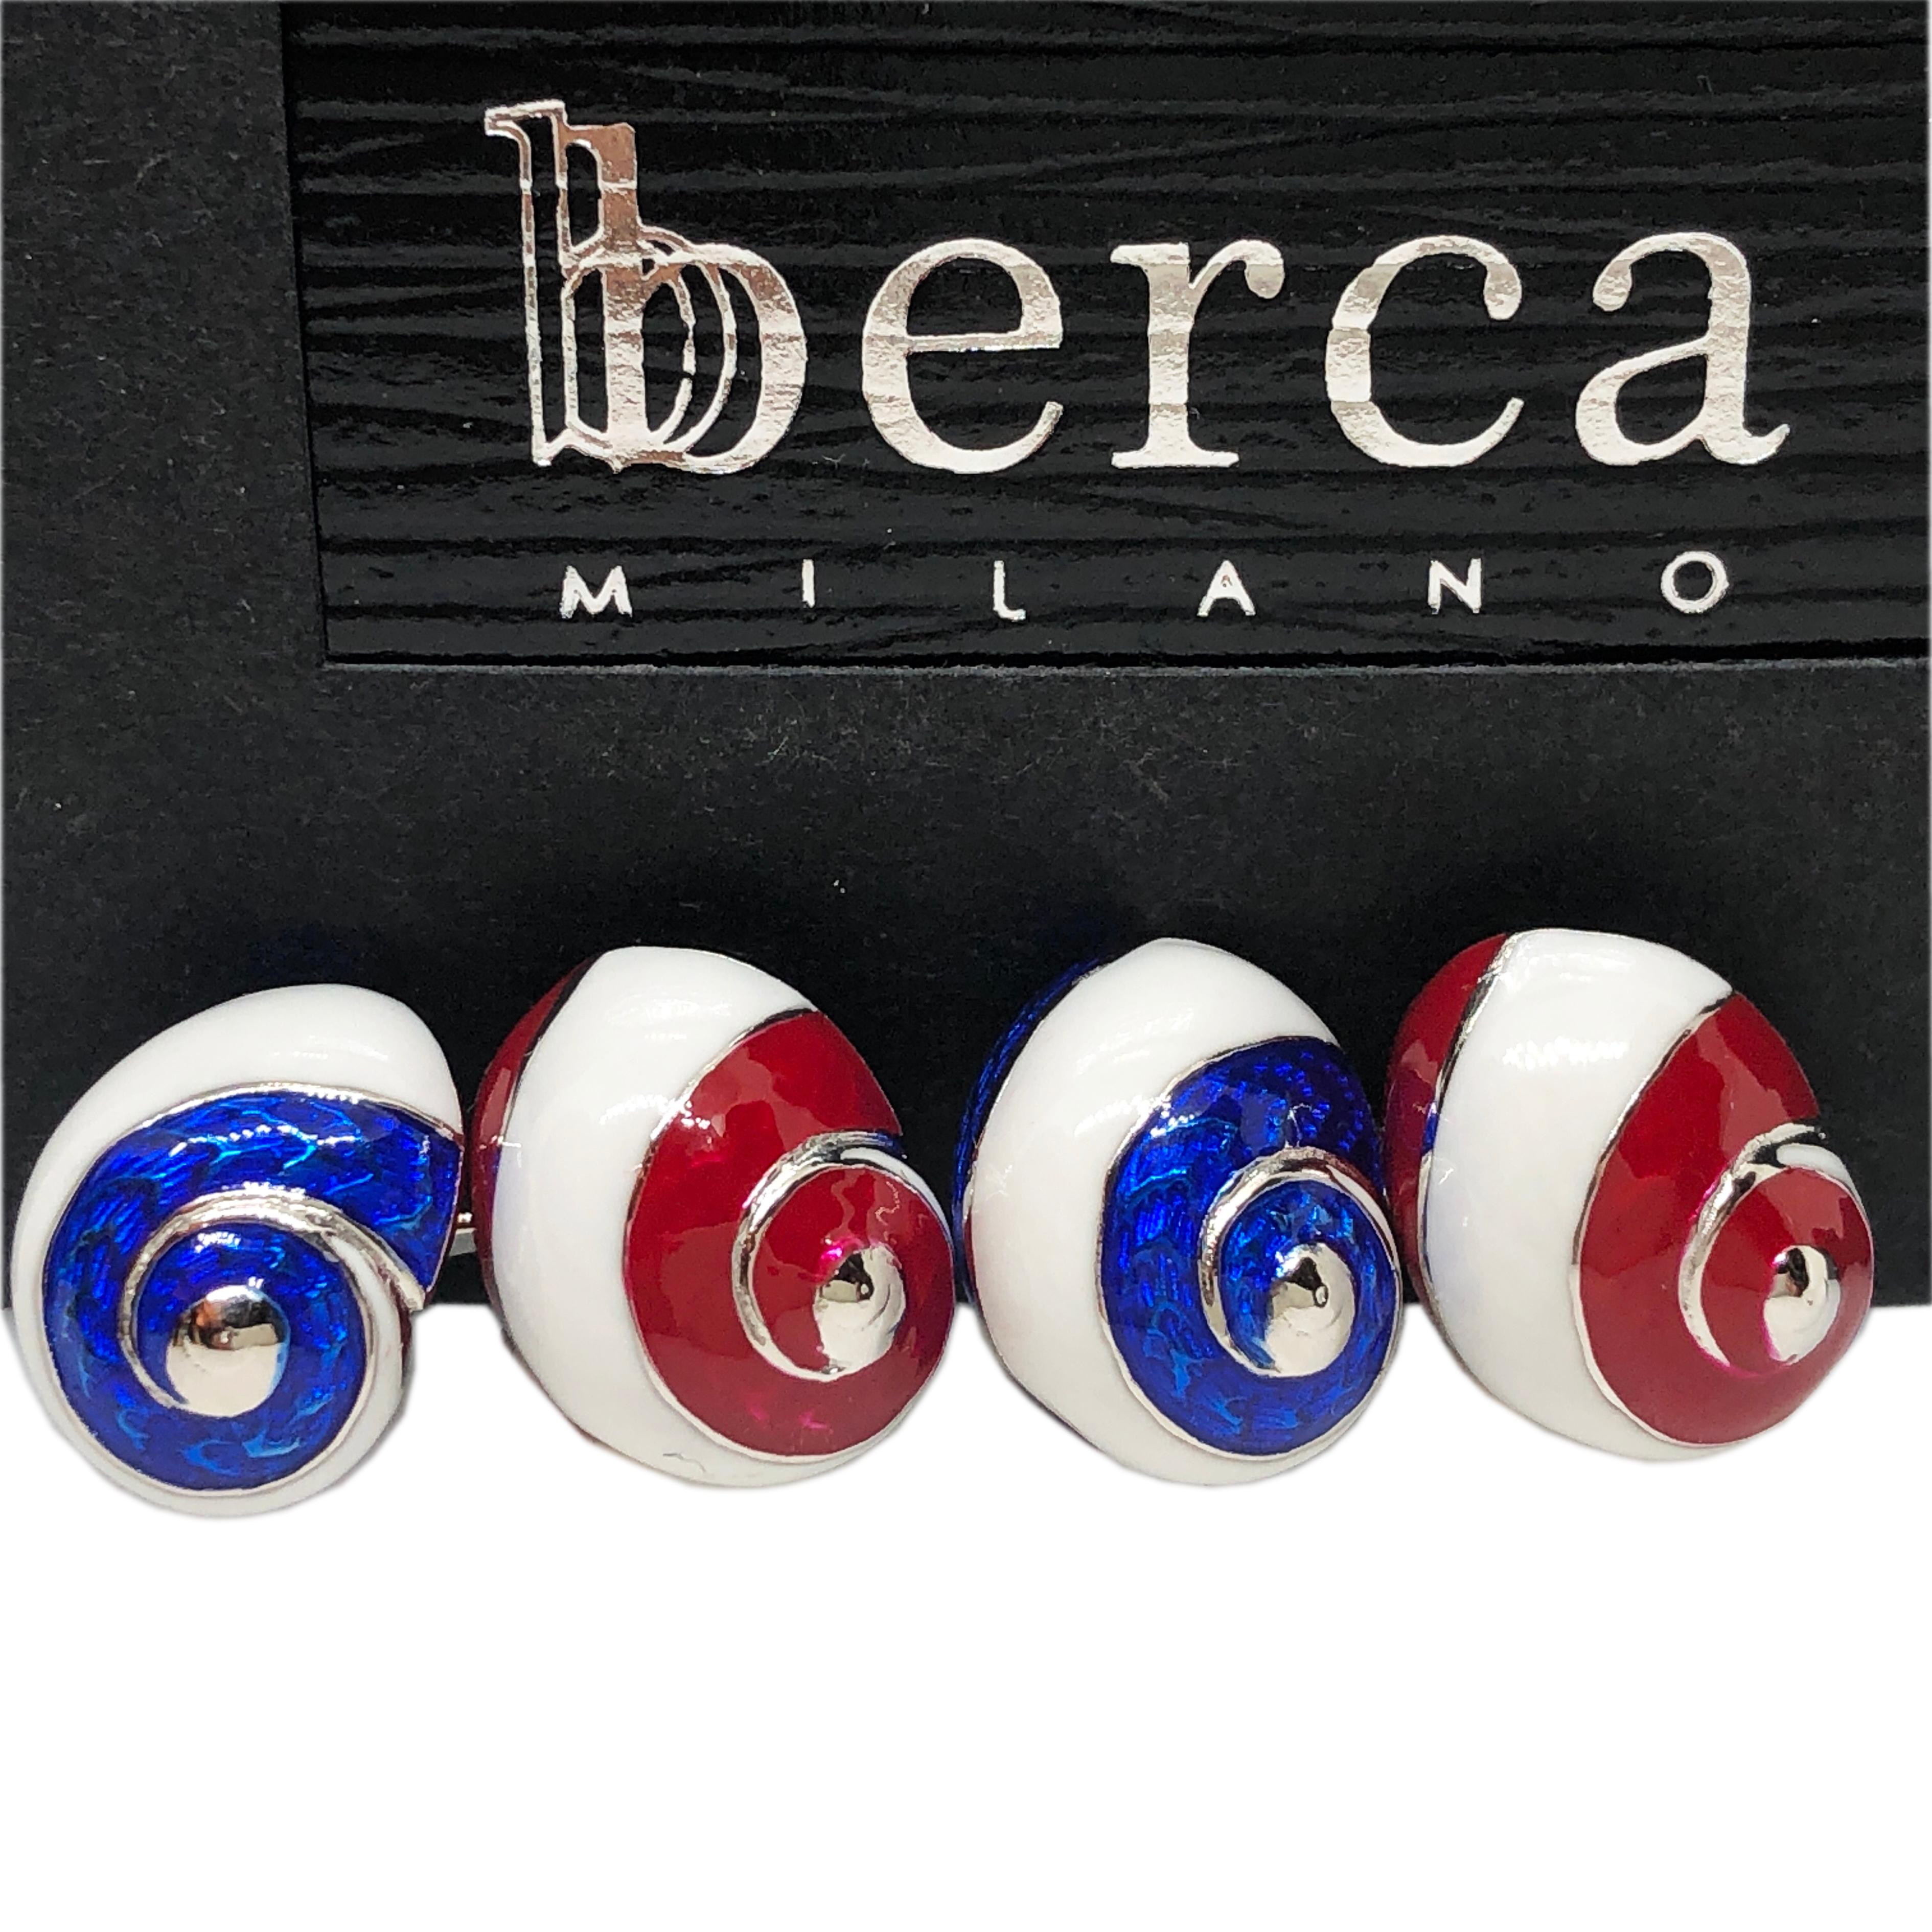 Unique and absolutely Chic, White, Red, Blue Hand Enamelled Seashell Shaped Sterling Silver Cufflinks.
In our smart black box and pouch.

Shell size about 0.511x0.393 inches
